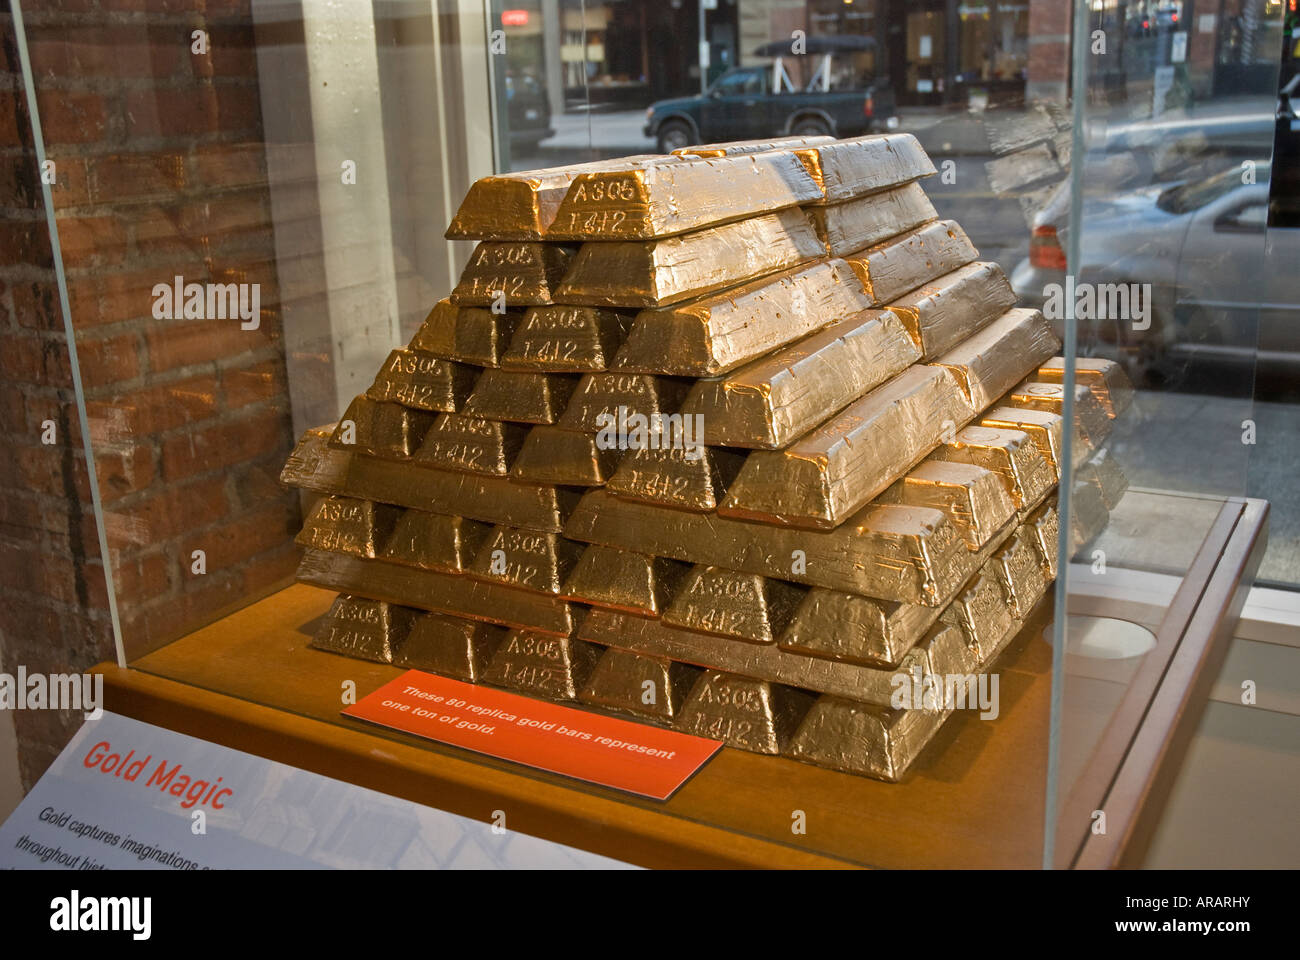 80 replica gold bars representing one ton of gold on